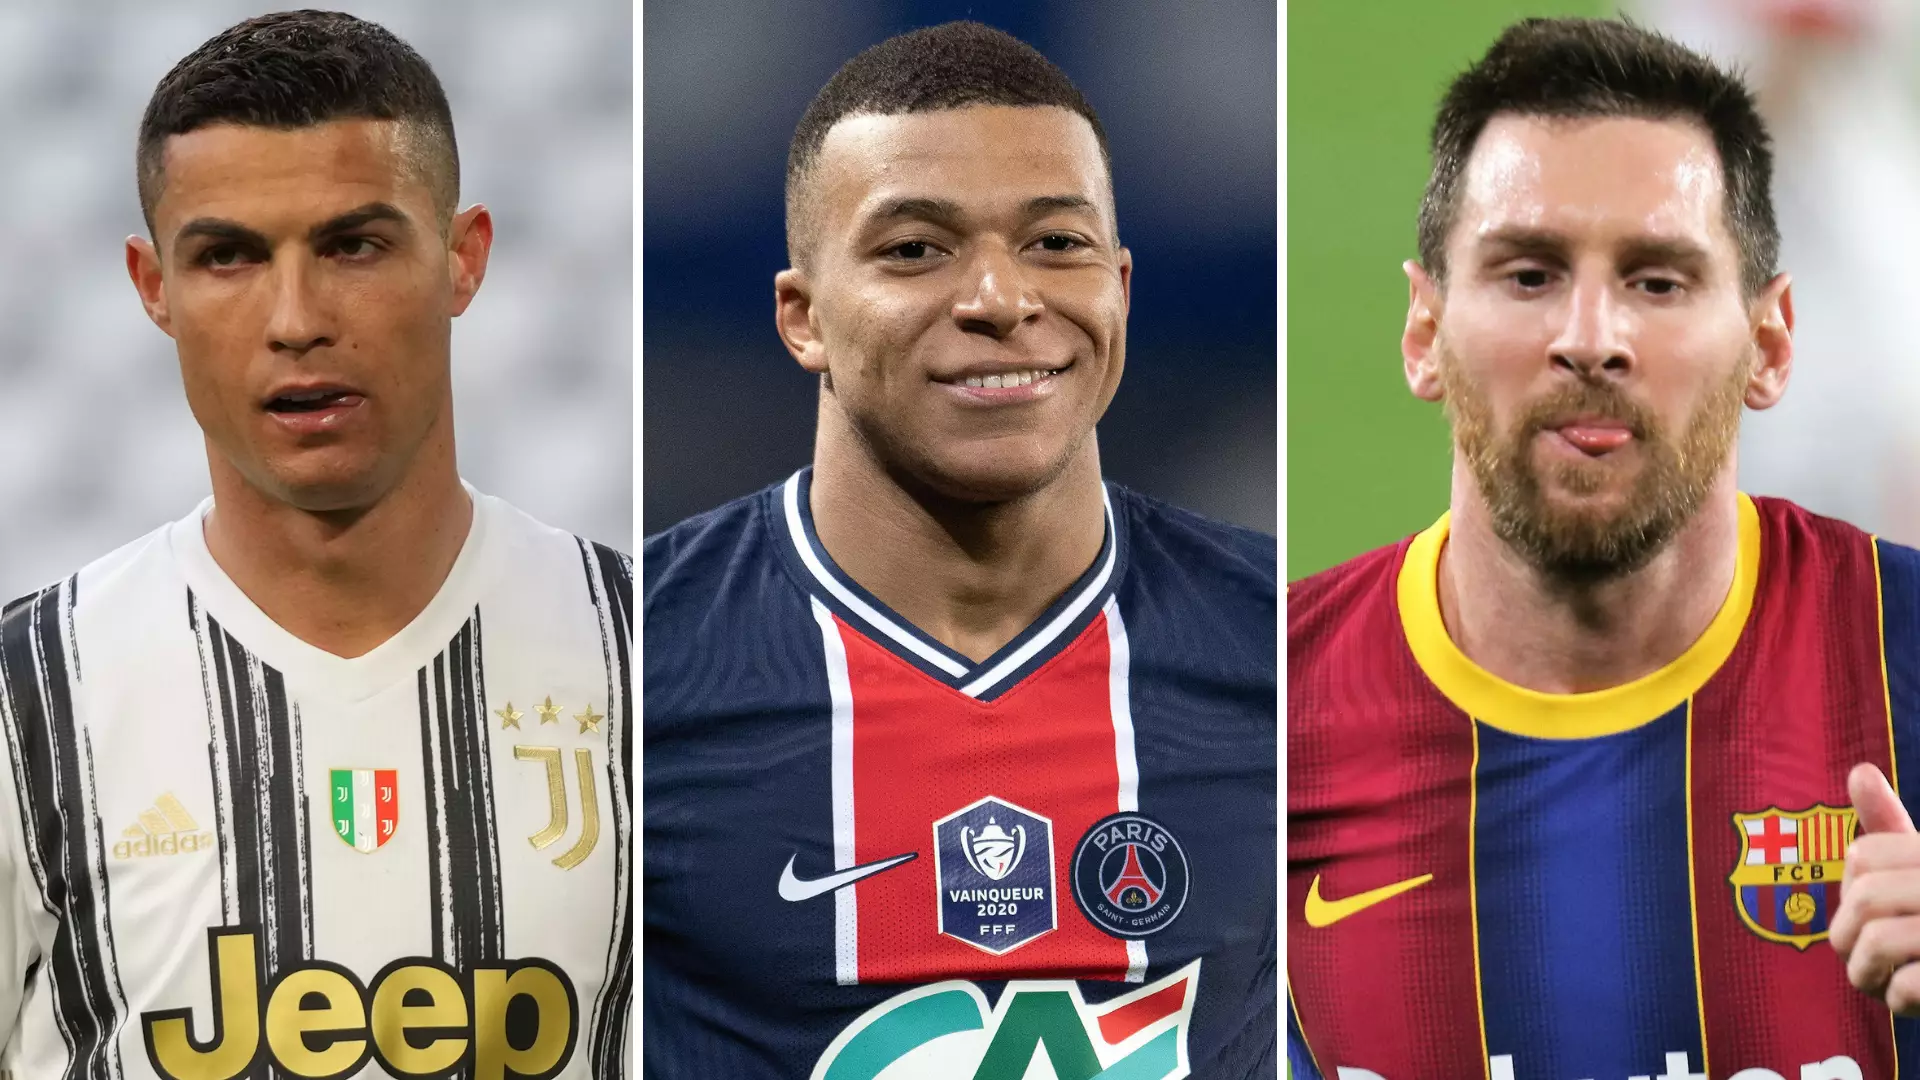 'Kylian Mbappe Is The Rightful Heir To Cristiano Ronaldo And Lionel Messi's Throne'